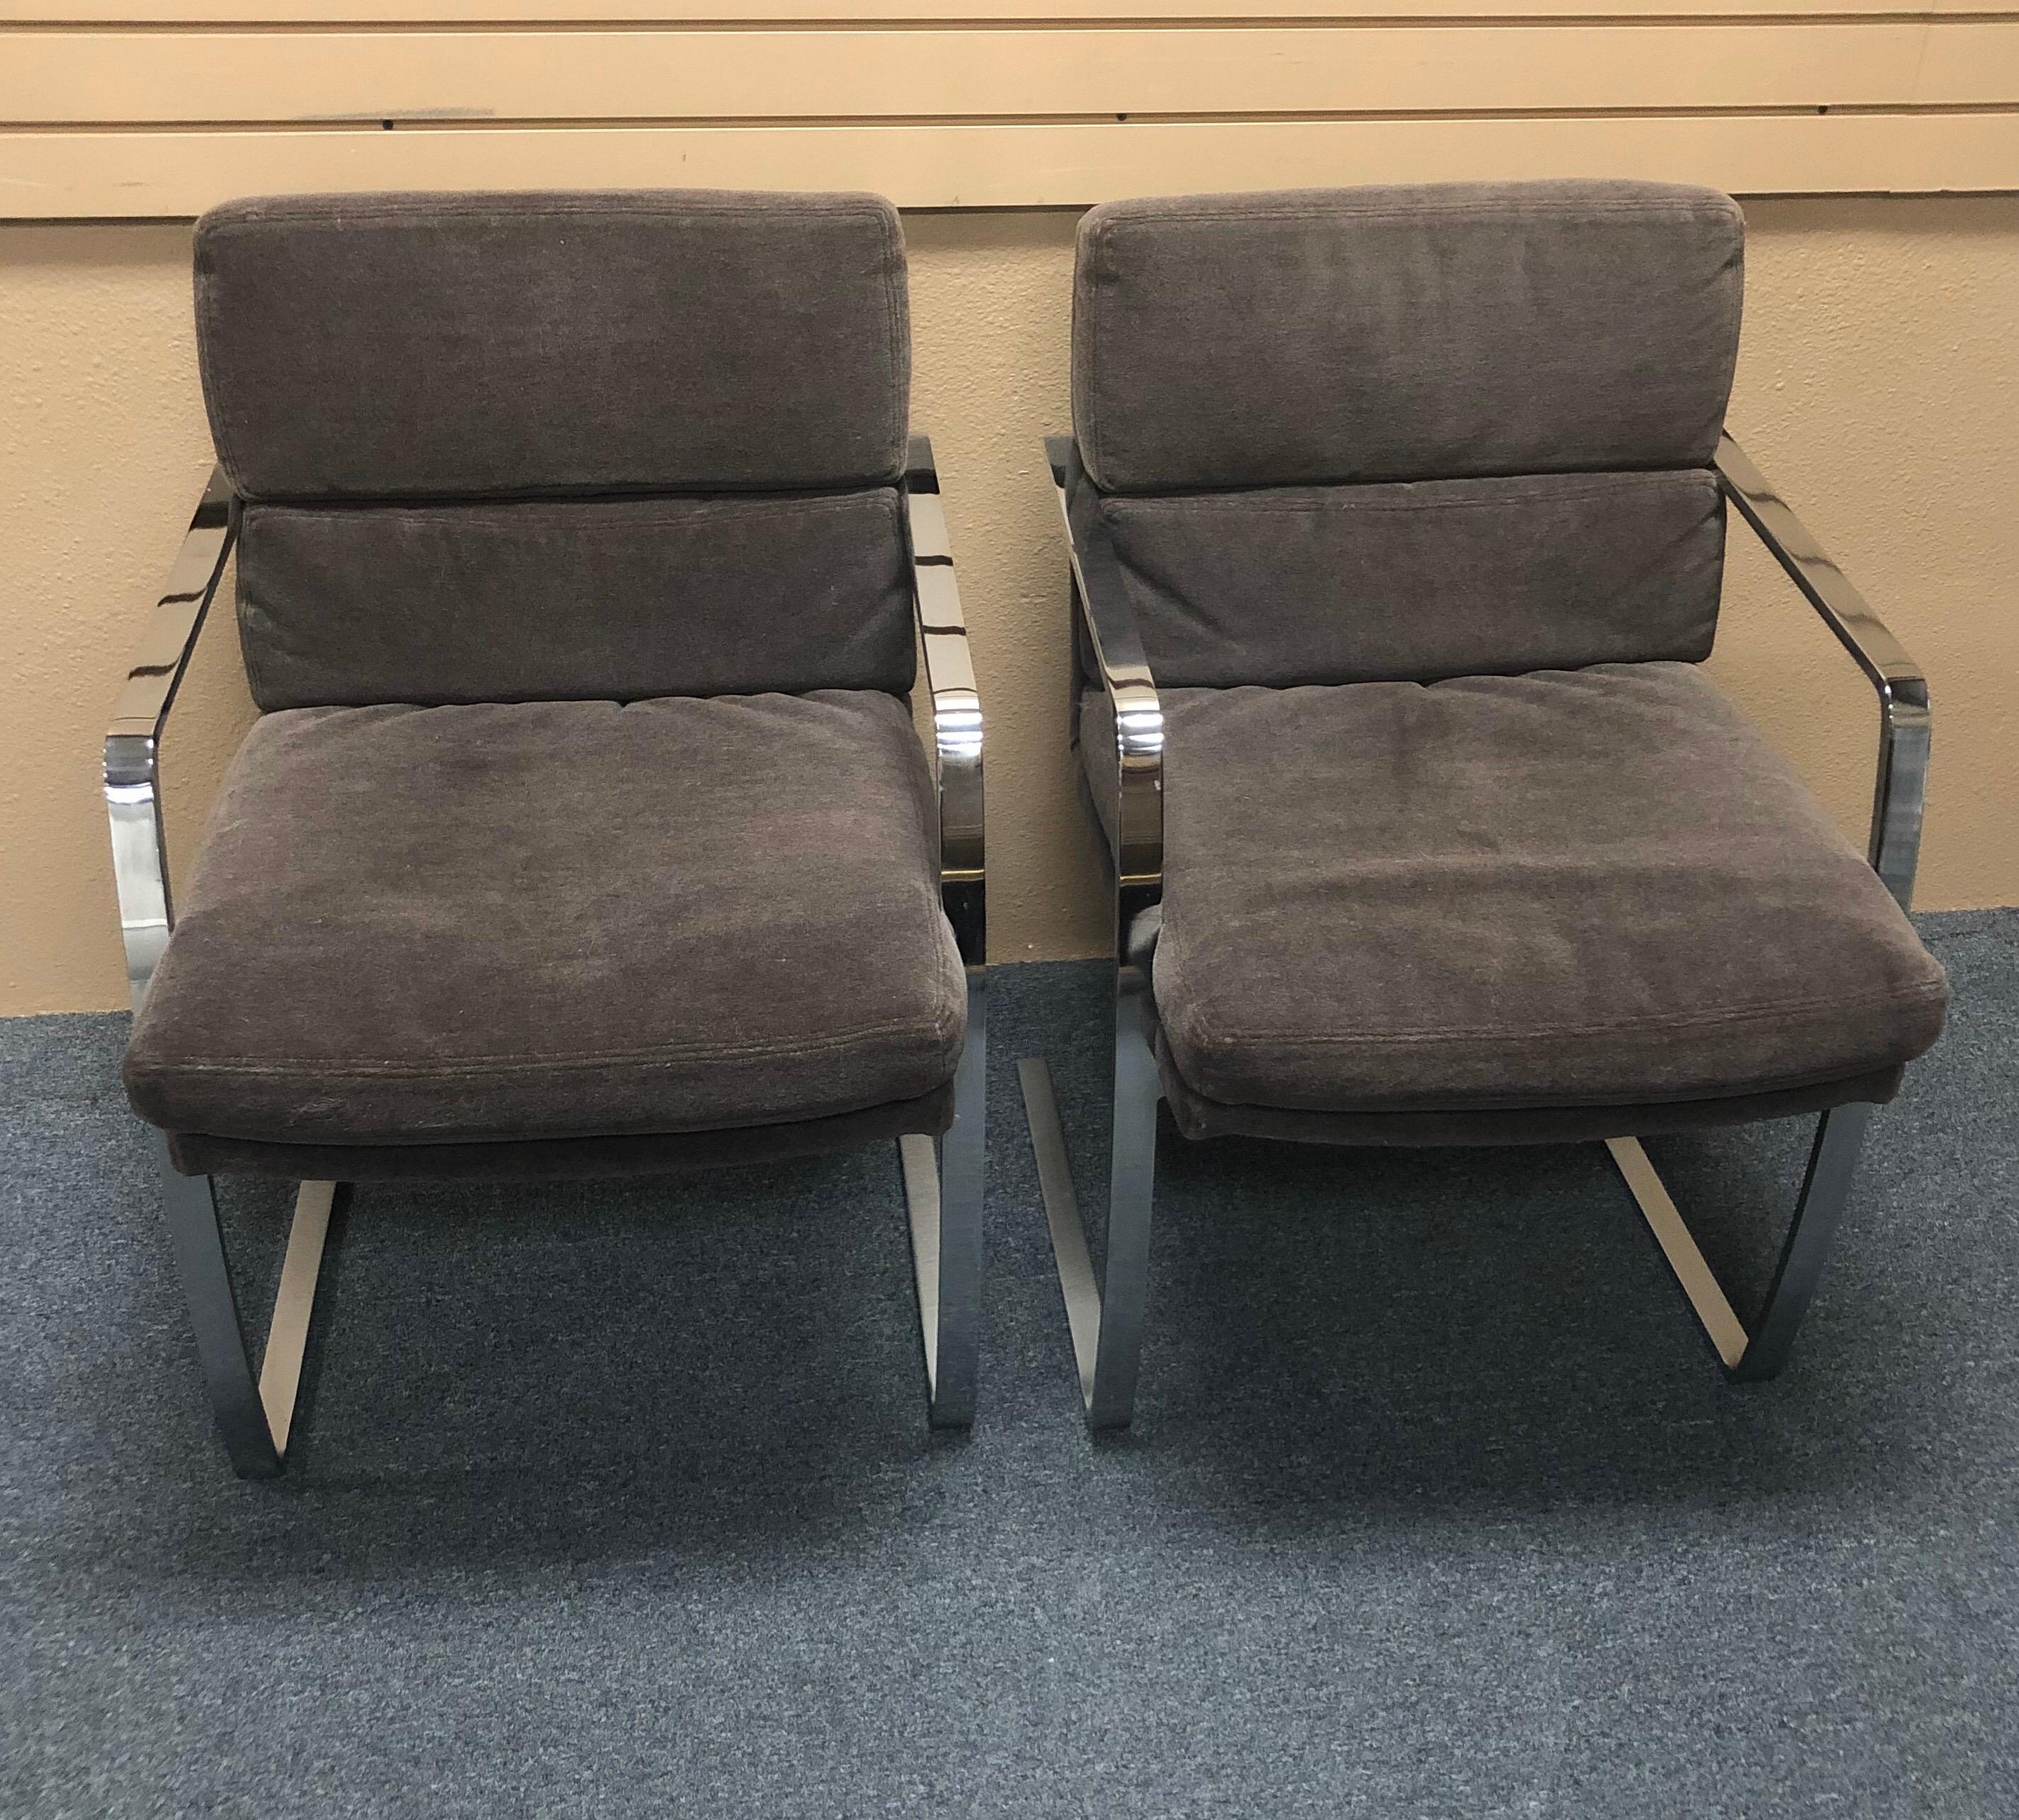 Pair of chrome framed cantilevered armchairs with brown mohair fabric by Pace collection, circa 1970s. These flat bar armchairs are super high quality with heavy chrome-plated flat bar cantilevered frame and their original brown mohair upholstery.